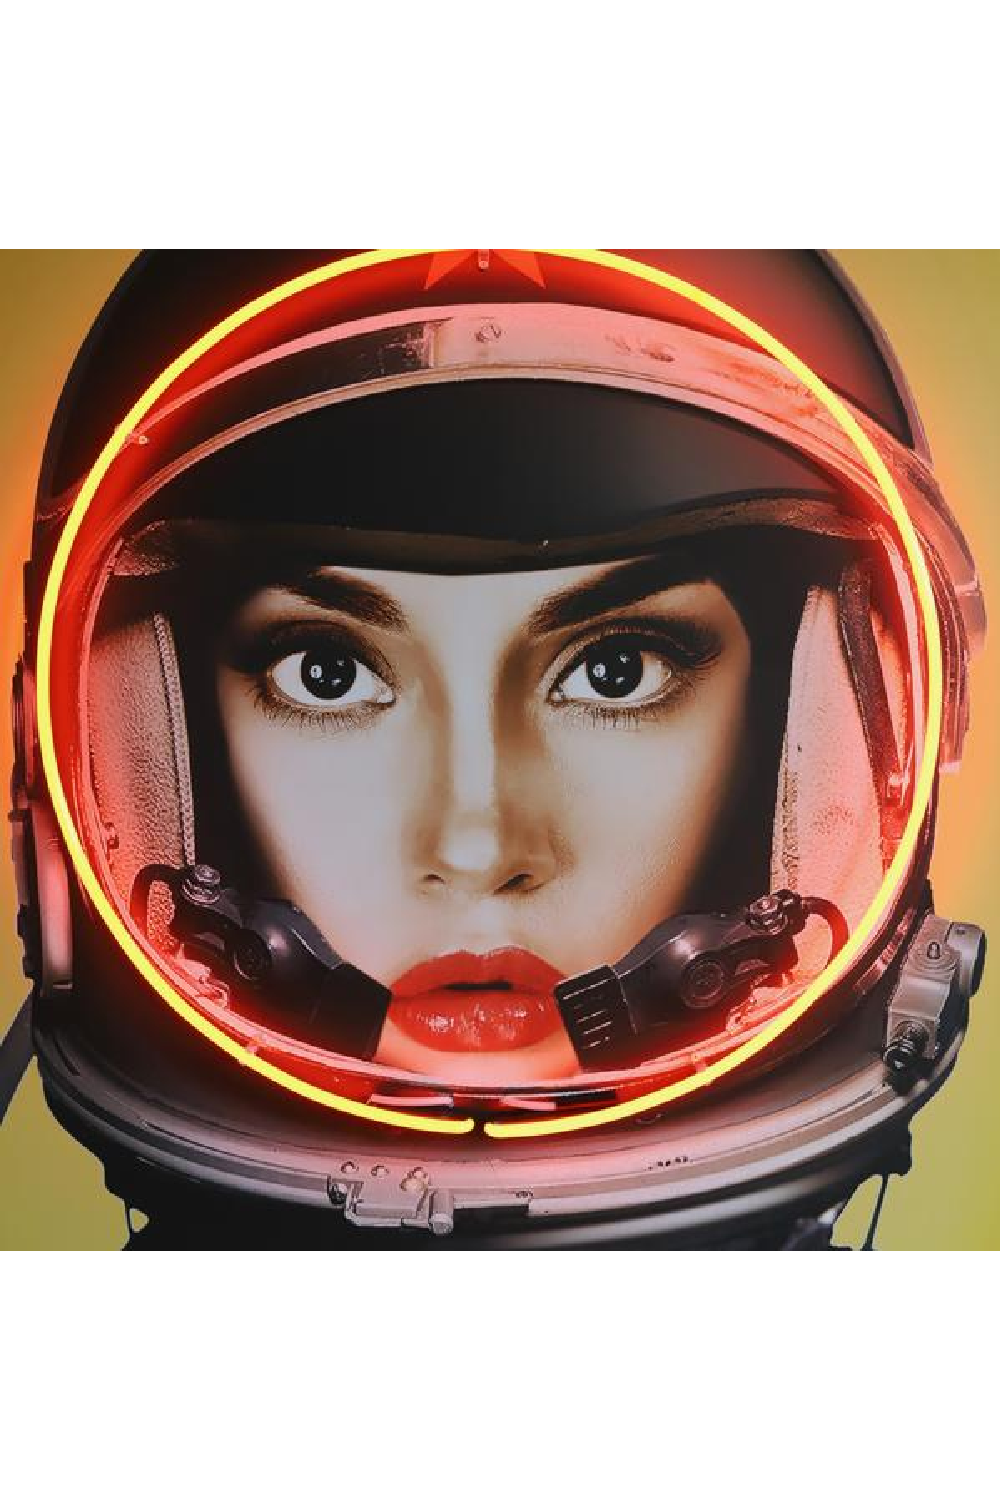 Louis Vuitton Spacesuit Neon Artwork - Andrew Martin Like a Boss